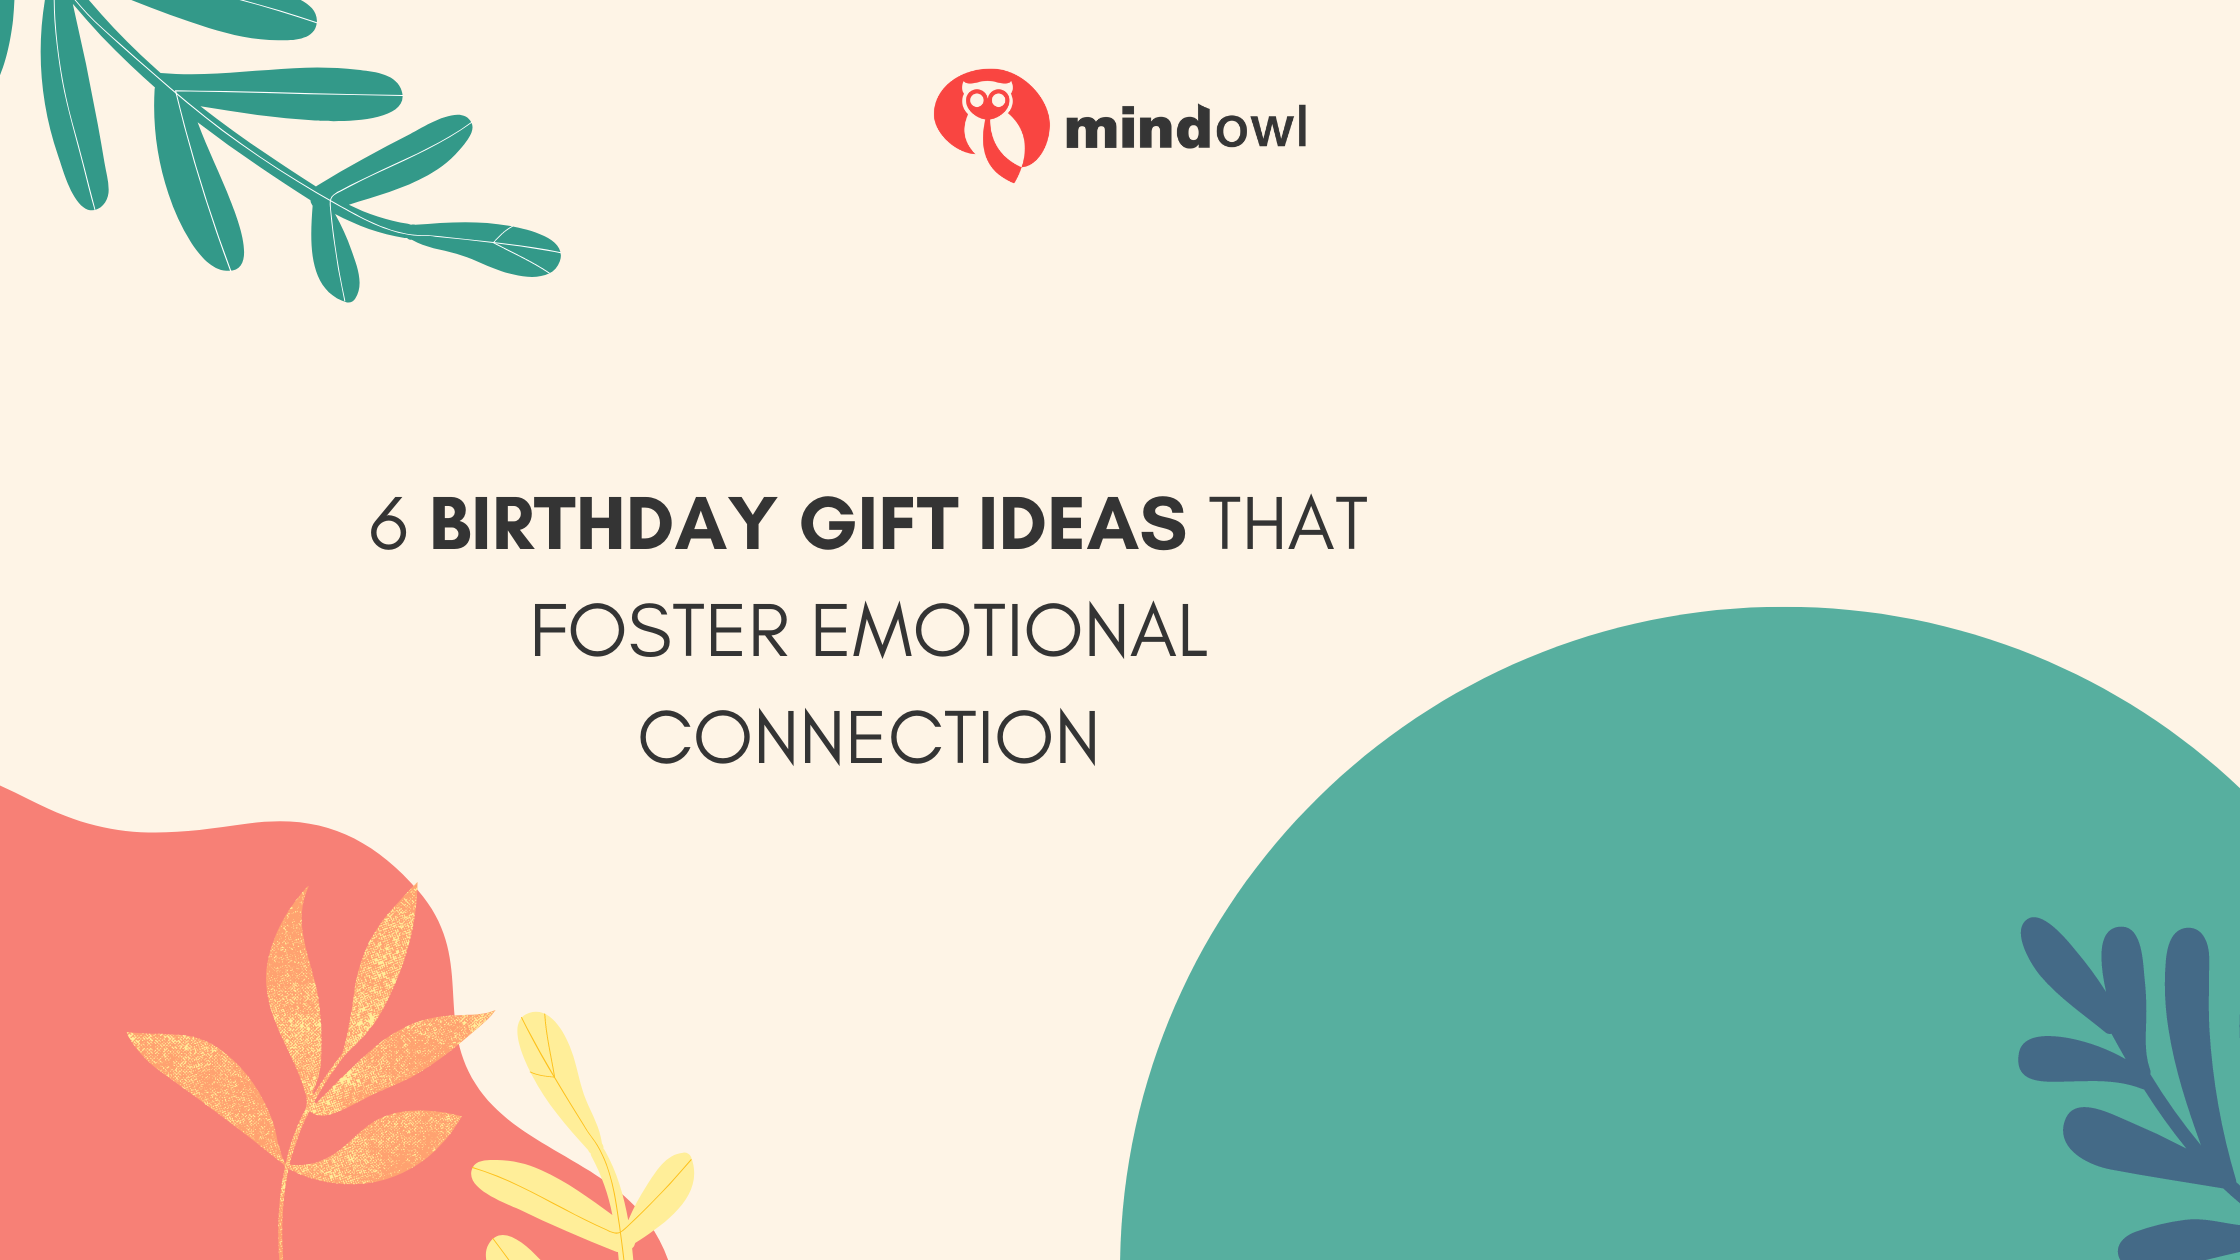 6 Birthday Gift Ideas that Foster Emotional Connection